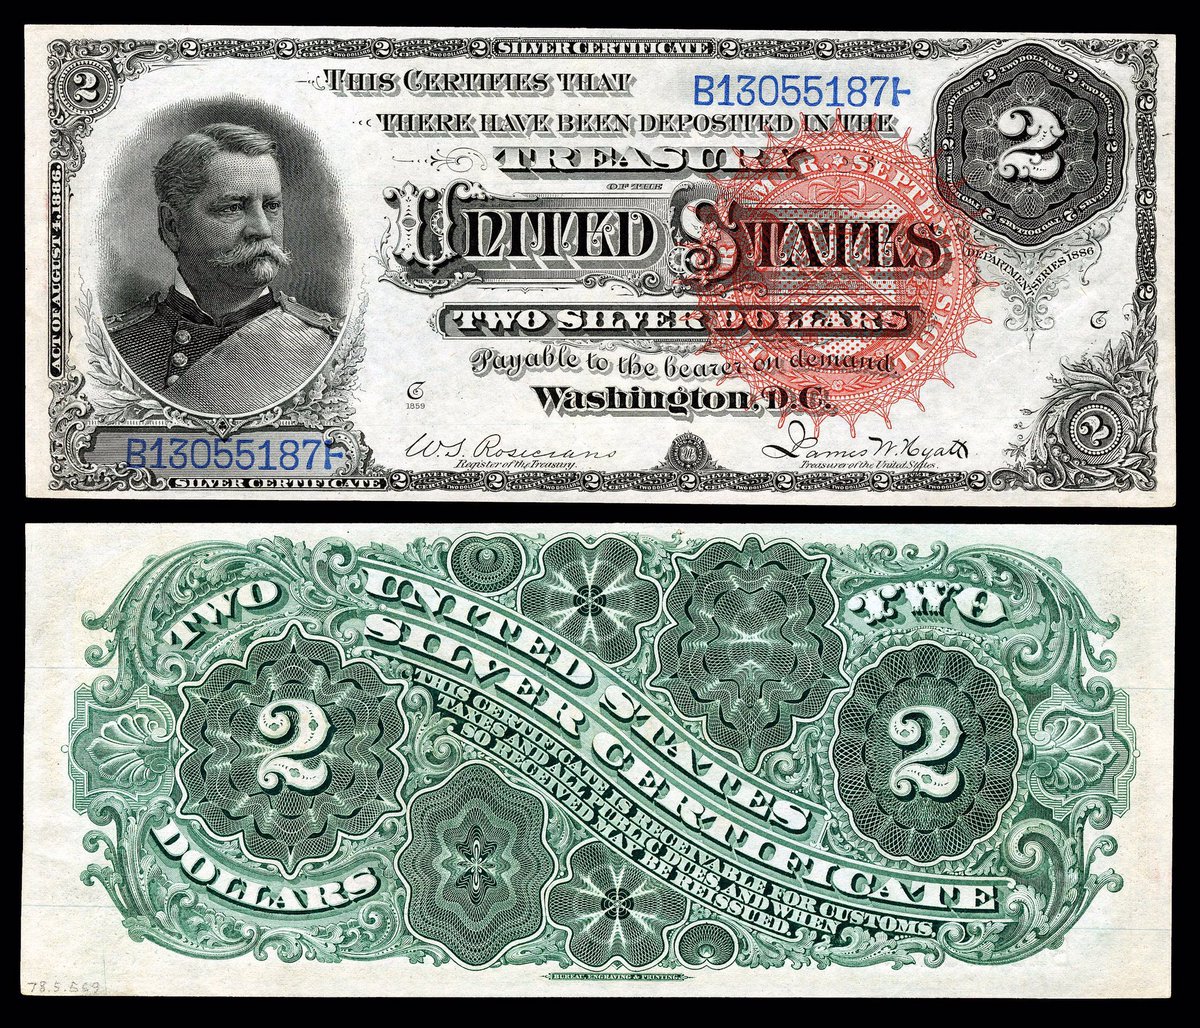 After the election, Hancock returned to service in the  @USArmy. He commanded the Military Division of the Atlantic at the time of his death from complications of diabetes. He has been honored with several statues & appeared on US $2 Silver Certificates in 1886.